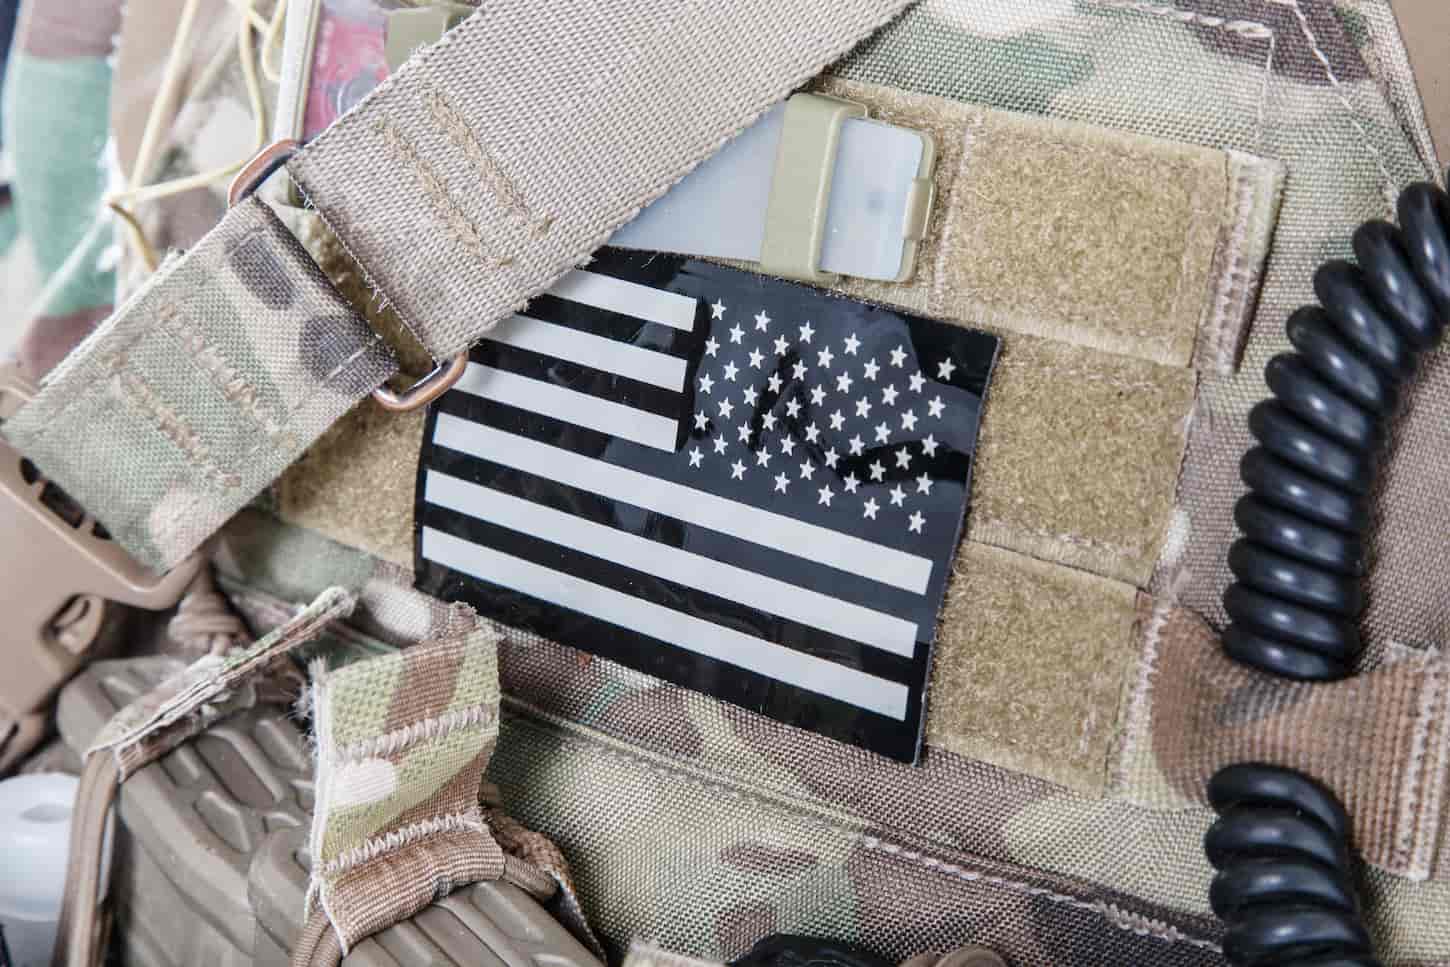 An image of the American flag stars stripes military patches on camouflage uniforms.